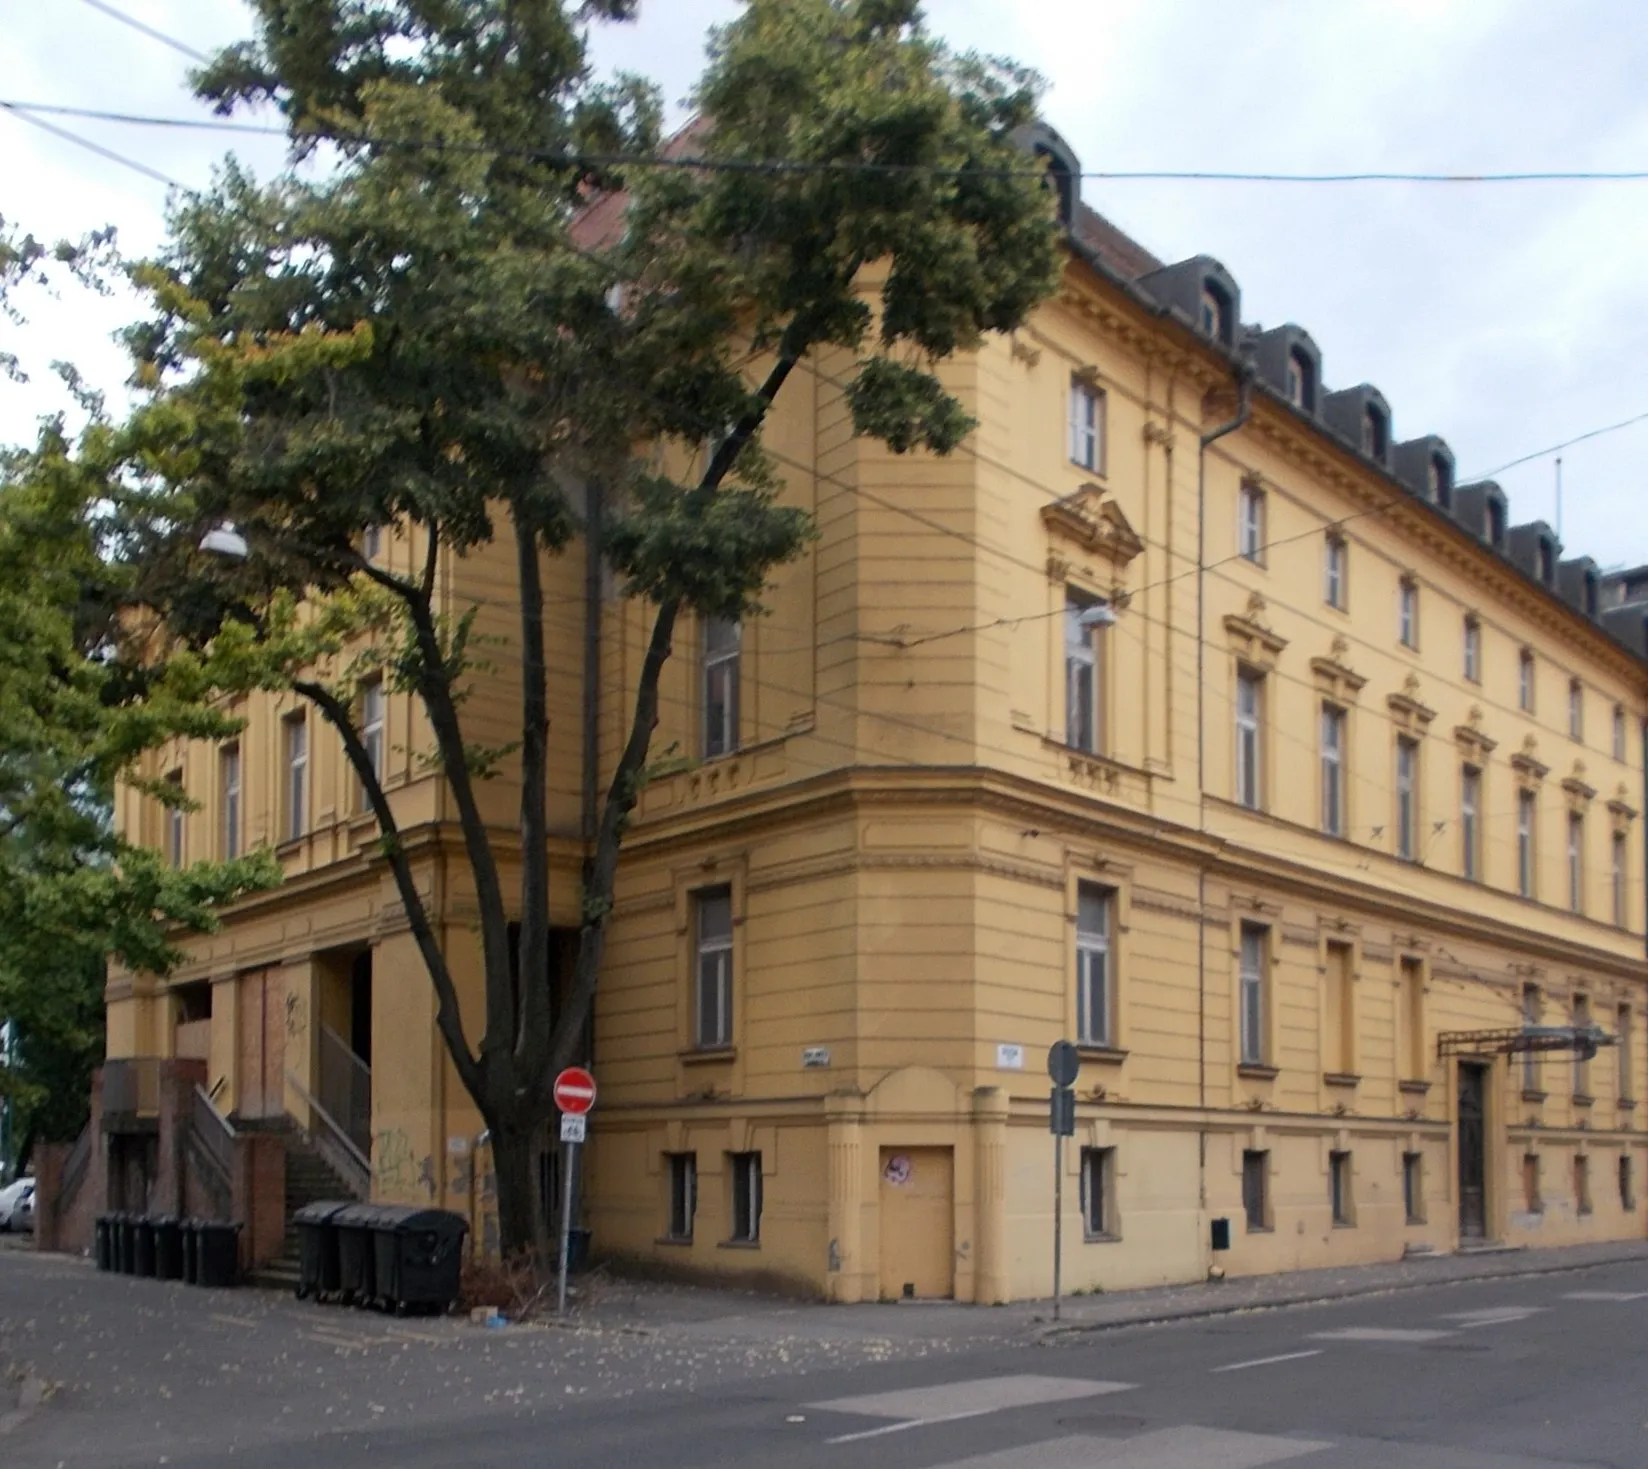 Photo showing: Two storey, three facades, listed corner building. Part of three cultural heritage ensembles. Built in 1897 as a one storey residential, community? café building to János Kass. Planned by Antal Steinhardt. Here was eight rooms flat of János Kass. Till 1920s here was Lloyd Association (pre Chamber of Commerce) event venue? and office. Built with arcades on Arany Street side. The courtyard was covered with iron glass roof based plans of the structural office of Schlick's iron foundry and machine factory in 1899. In 1911 on Stefánia side  a cellar was established with a cast slab designed by István Kopasz. Remodelled to hotel designed by architect Lipót Baumhorn and executed by János Kopasz in 1916. In 1952 the cellar and basement were remodeled according to the plans of József Barna. In 1977 the hotel was closed. The South Hungarian Building and Civil Engineering Company (DÉLÉP) bought it to transform the restaurant part into a community centre and the hotel into a guest house. Then it is owned by Hungária Rt. as Hungária Hotel. Since 1997, it has been owned by the Quaestor Group, which went bankrupt in 2015. In 2023, the building looked abandoned. - 2-4 Arany János utca=1-3 Dózsa Street = 8 Stefánia, Belváros (Inner City) neighborough, Szeged, Csongrád-Csanád County, Hungary.